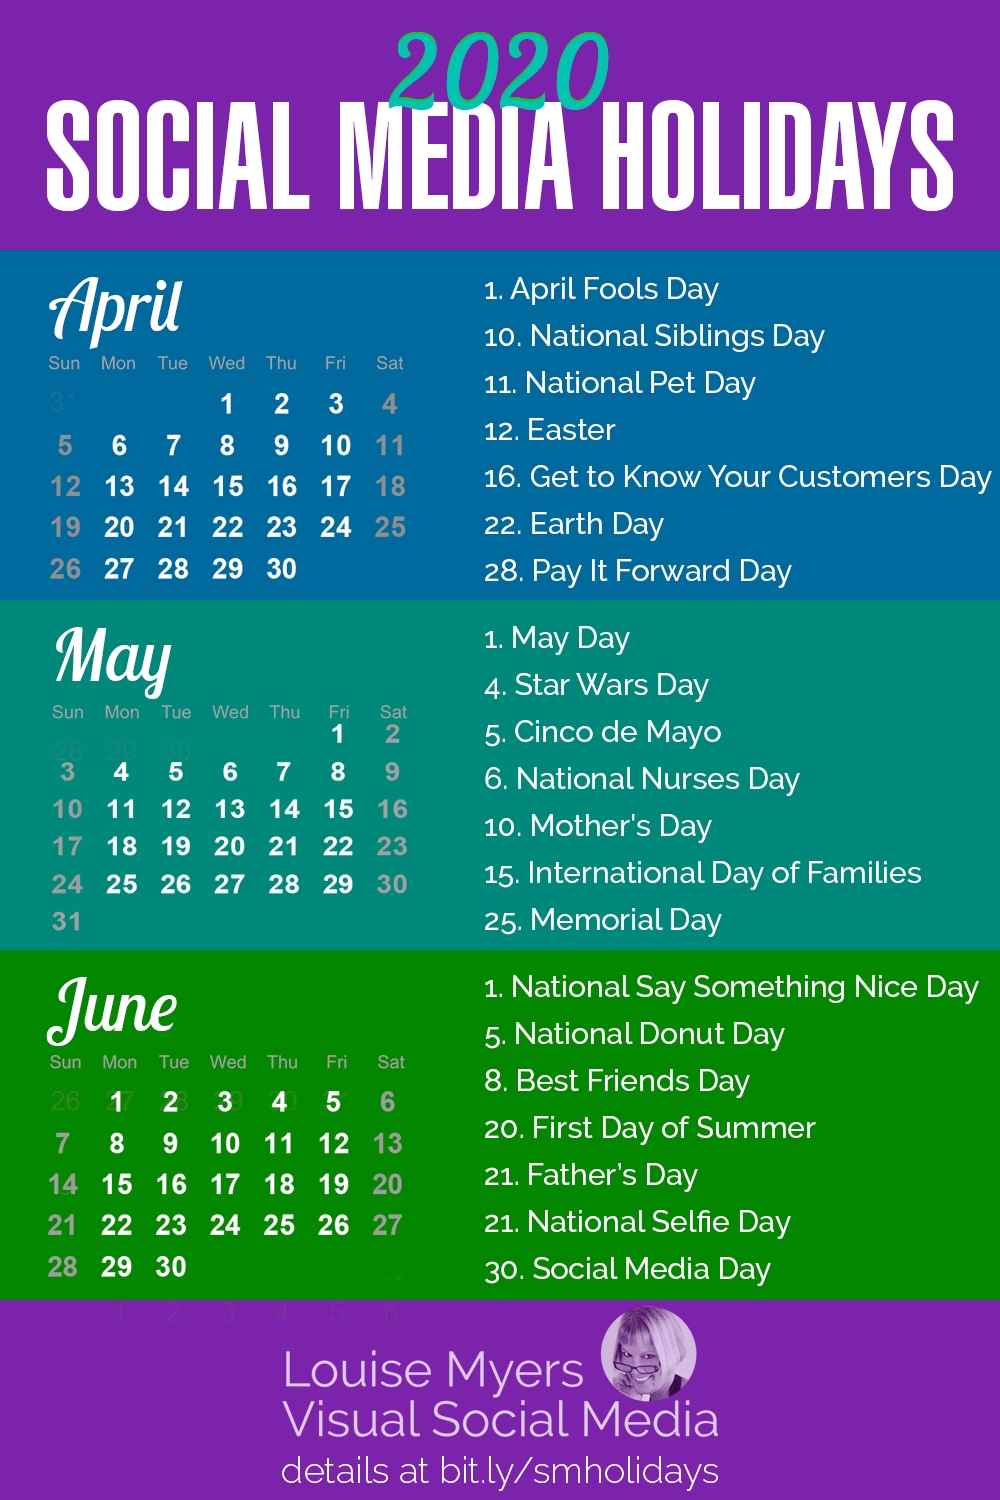 84 Social Media Holidays You Need In 2020: Indispensable!-National Calendar Holidays 2020